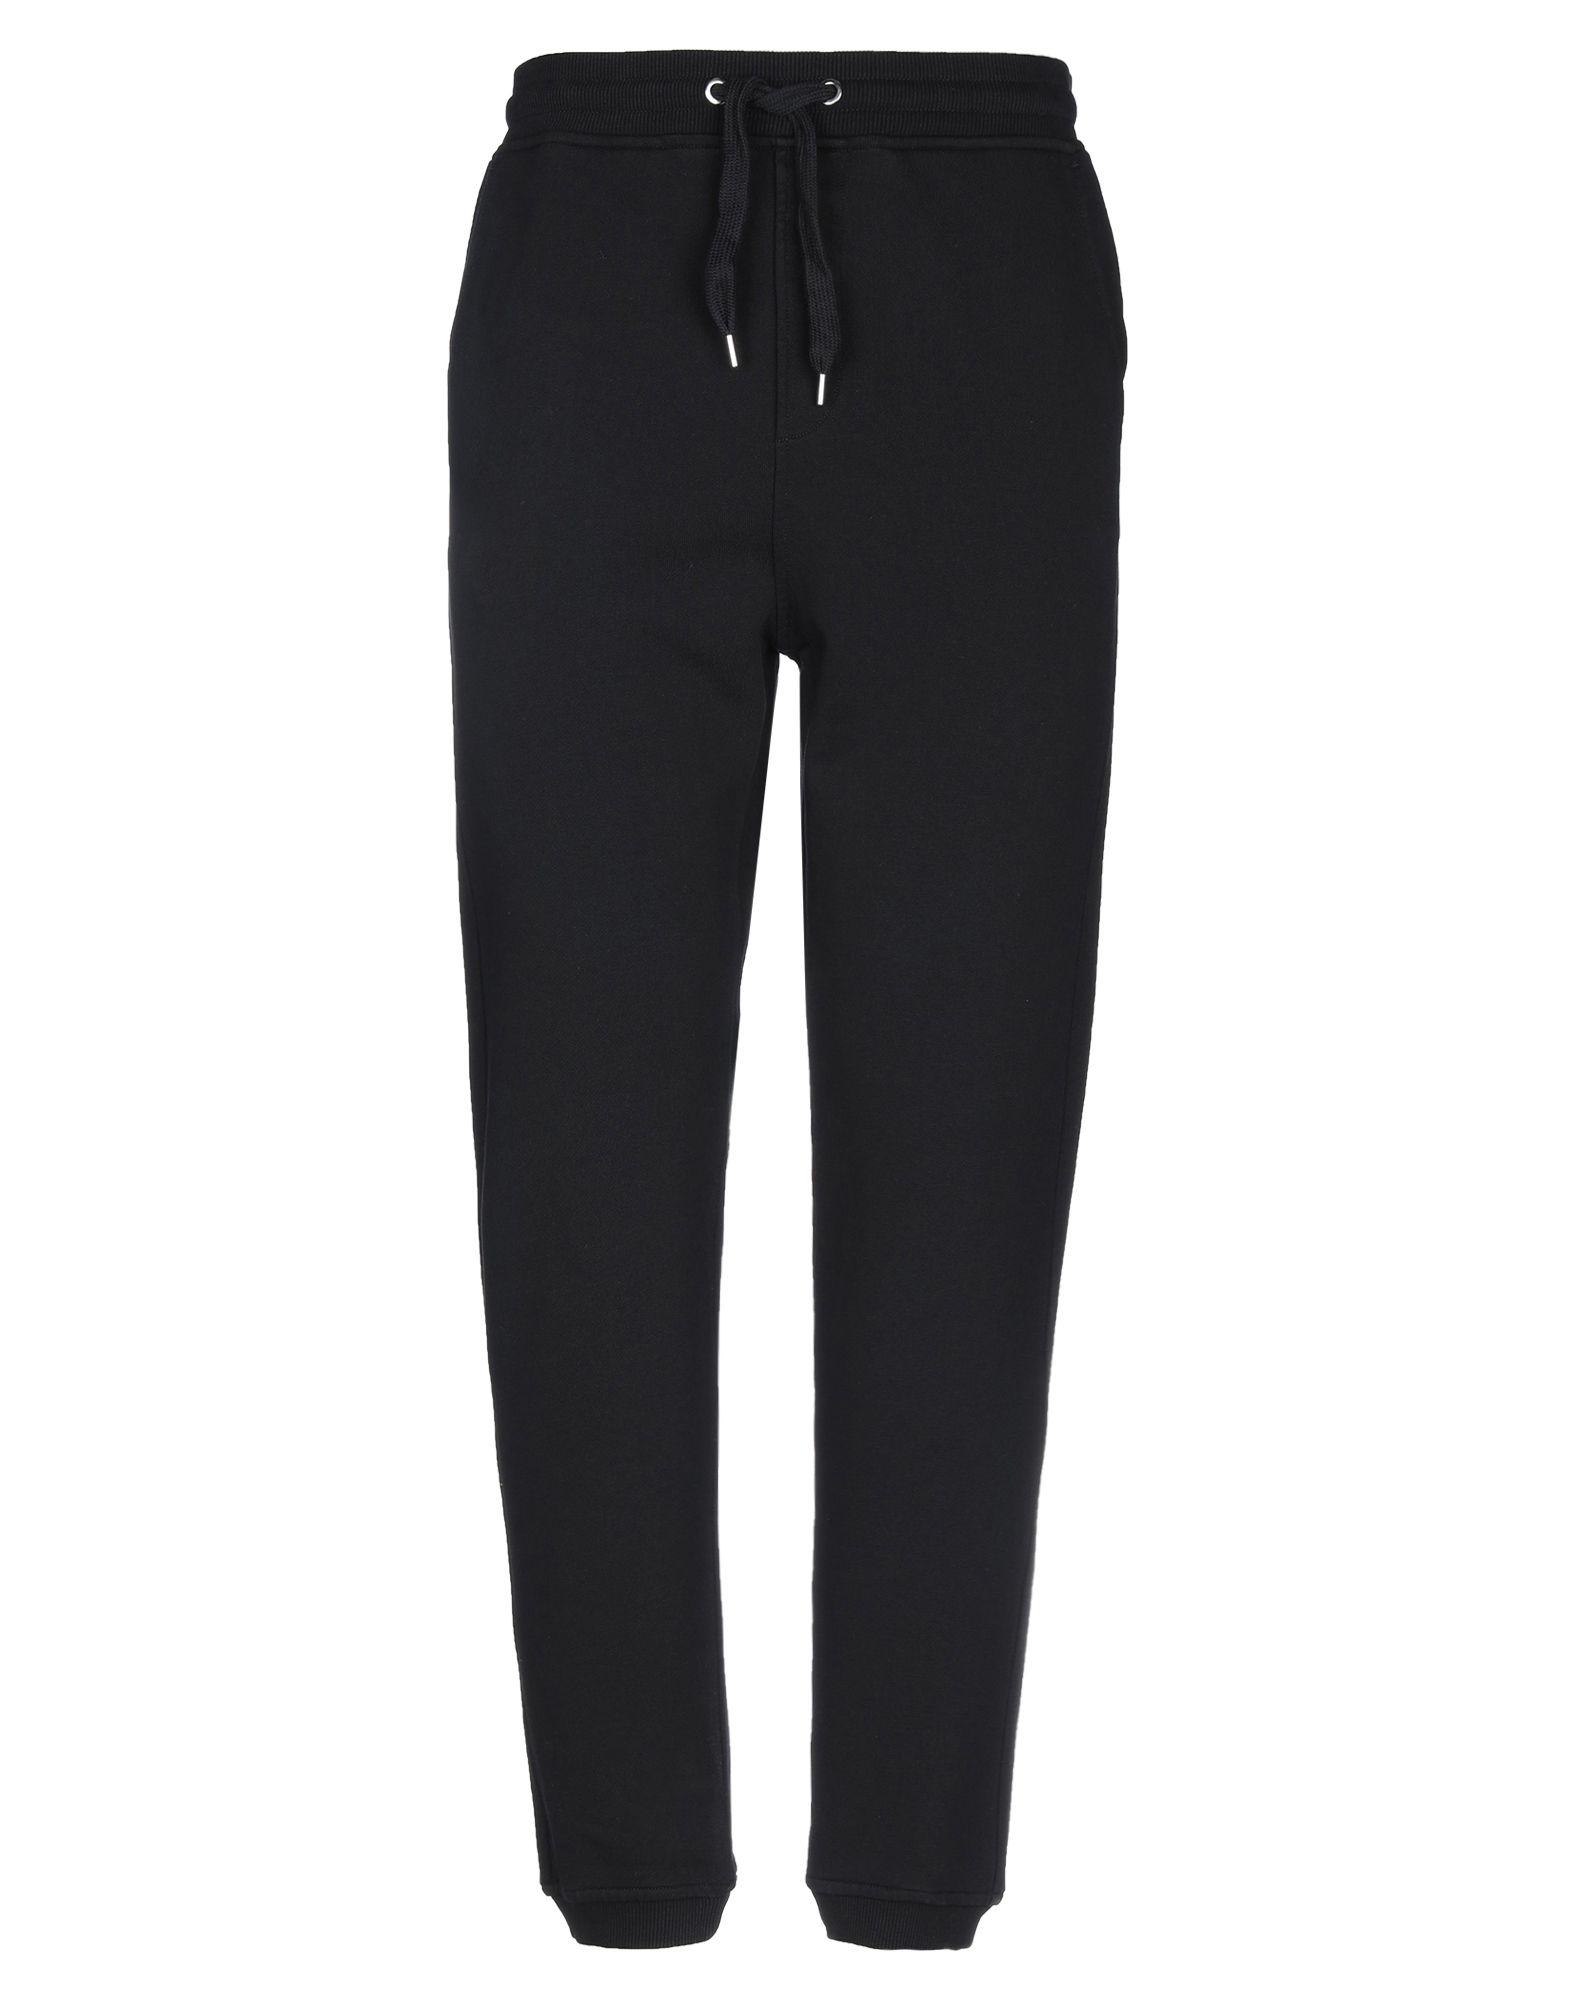 Just Cavalli Casual Trouser in Black for Men - Lyst